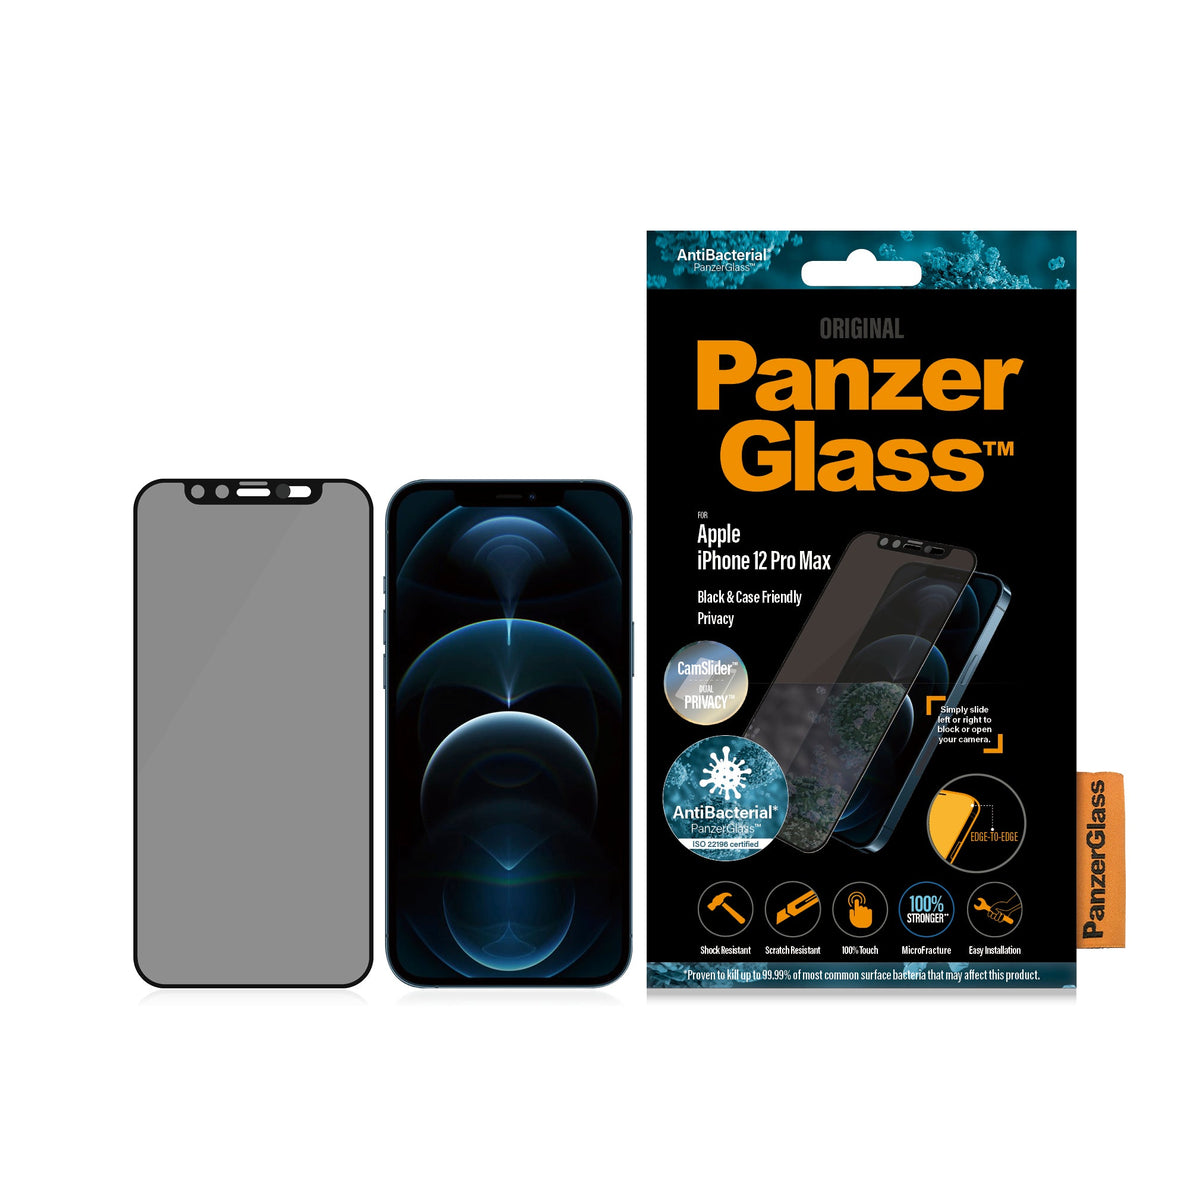 [OPEN BOX] PANZERGLASS iPhone 12 Pro Max - Cam Slider Black Frame w/ Anti-Microbial Screen Protector - Privacy